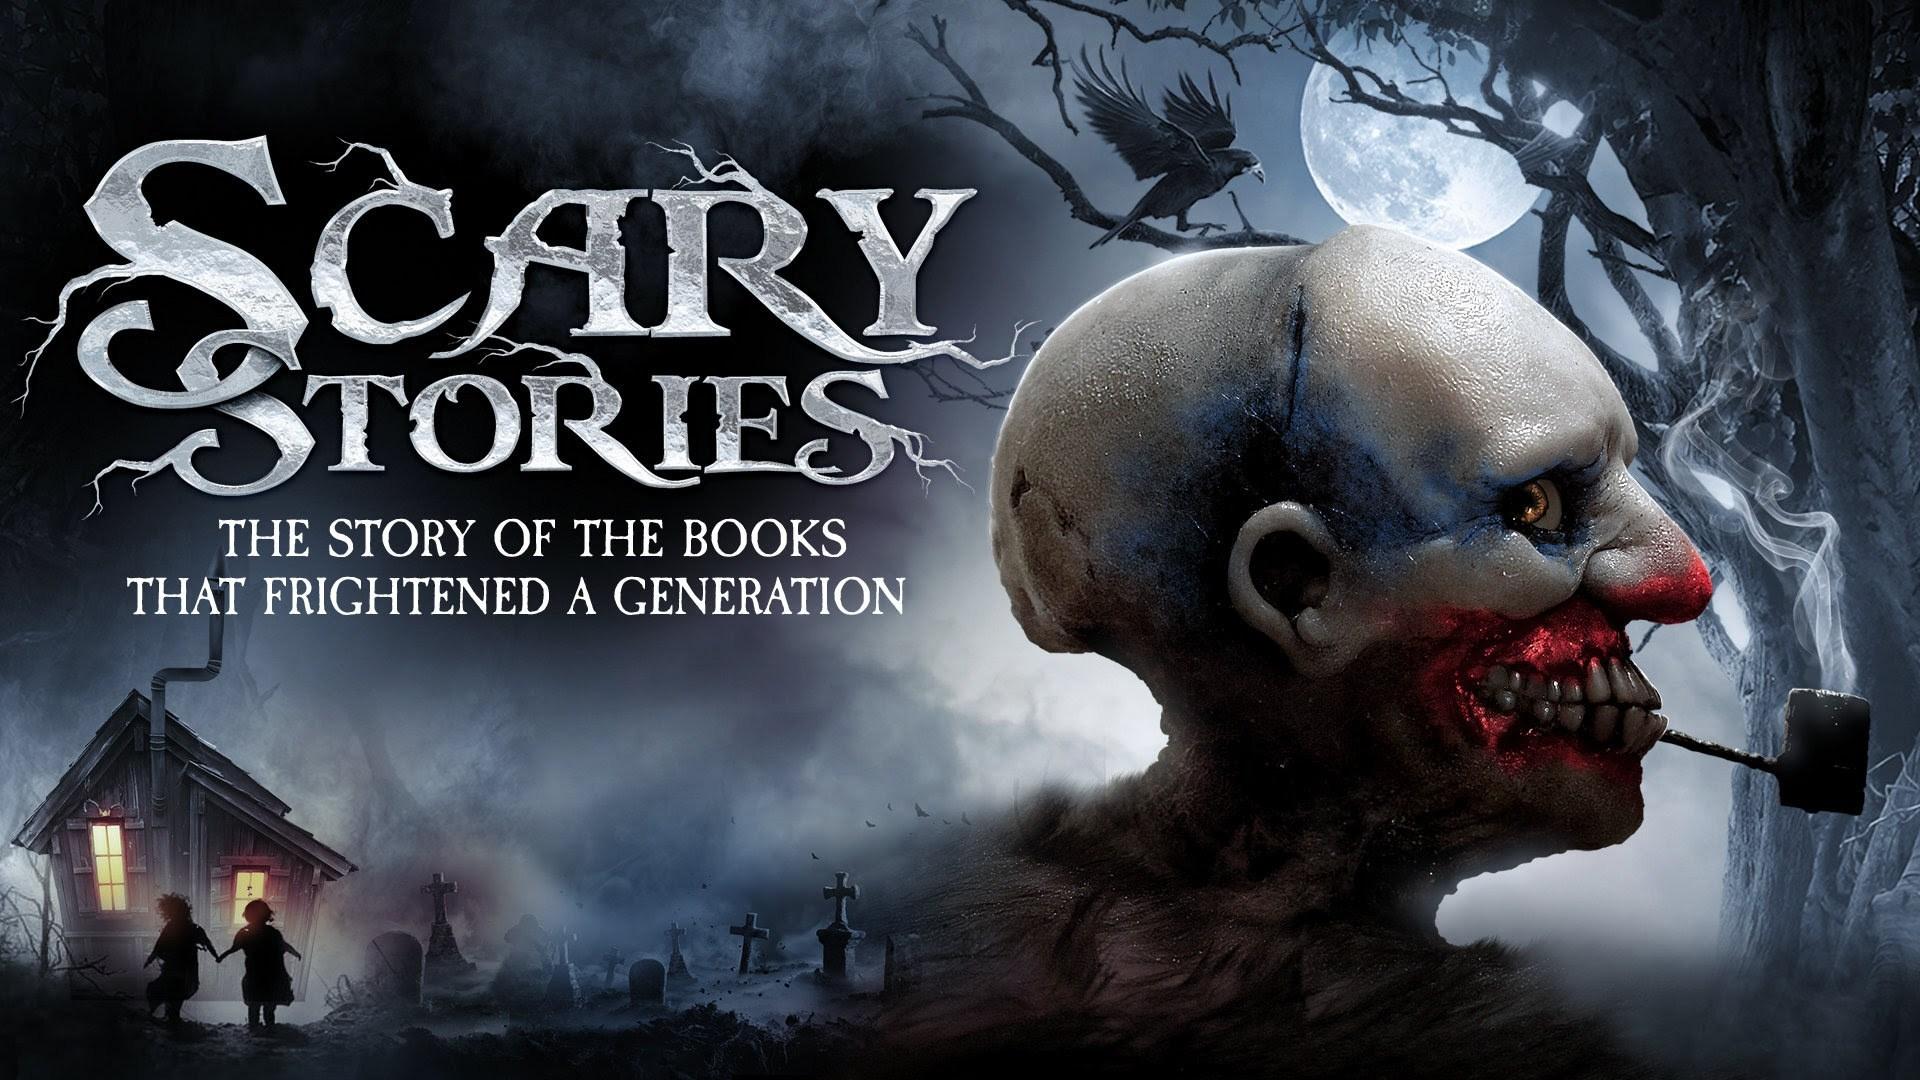 SCARY STORIES TO TELL IN THE DARK Documentary Hits Theaters This April!